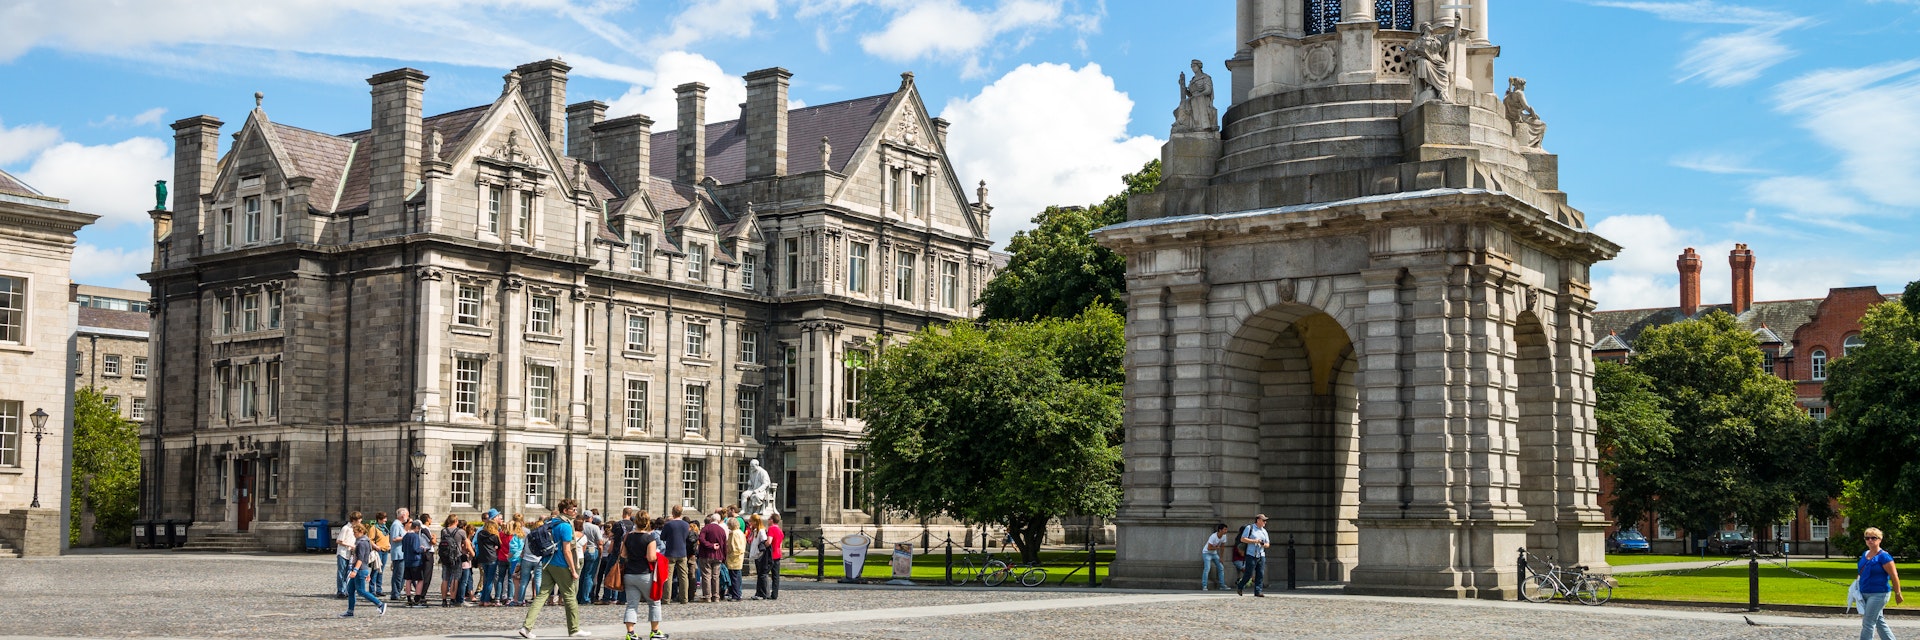 Dublin, Ireland - August 3, 2013: Visitors under the Campanile of the Trinity College